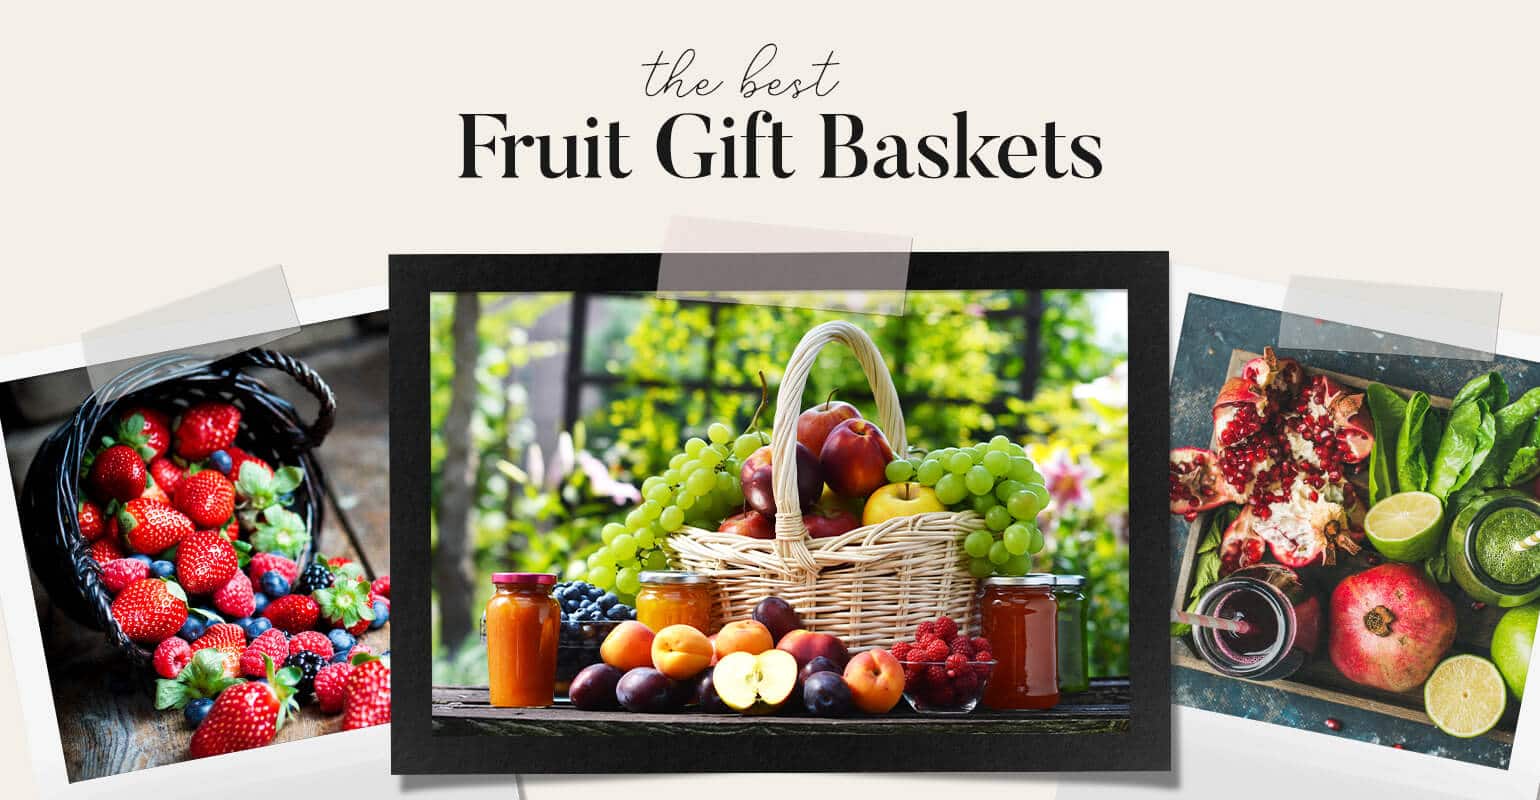 7 Fruit Gift Baskets That Make For a Gorgeous Gift